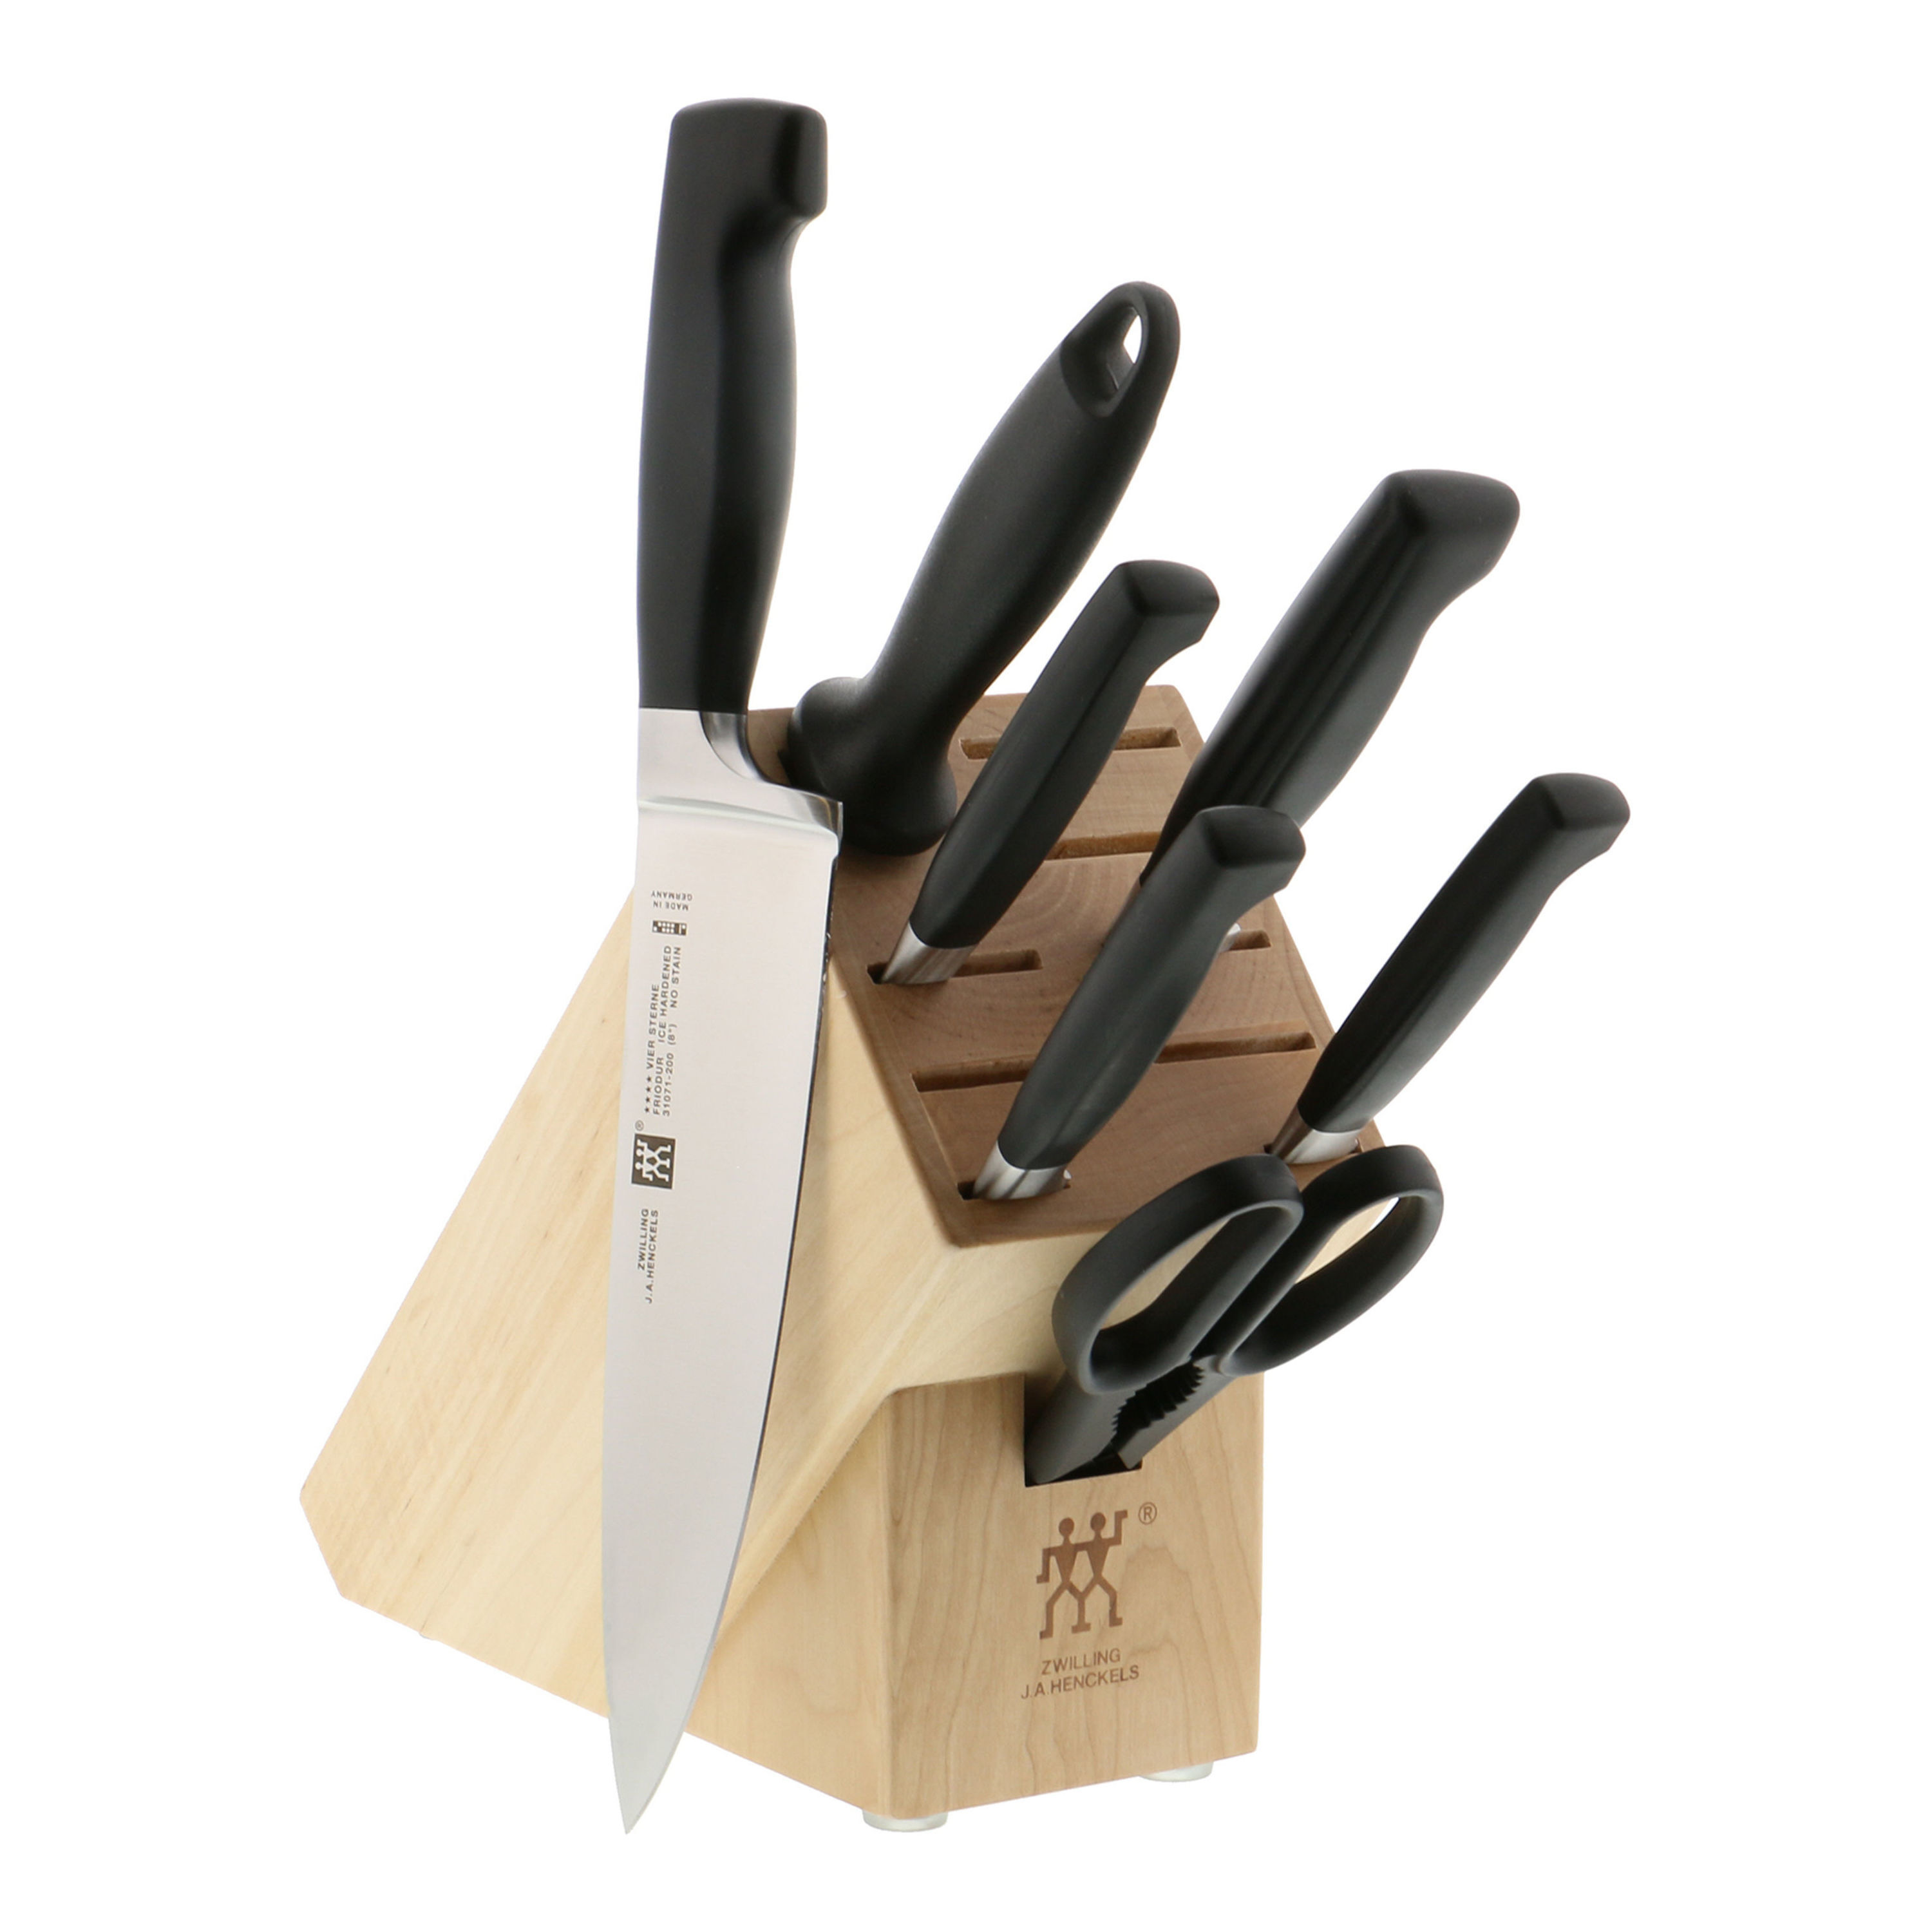 Zwilling Knives Set Clearance, 58% OFF | www.emanagreen.com